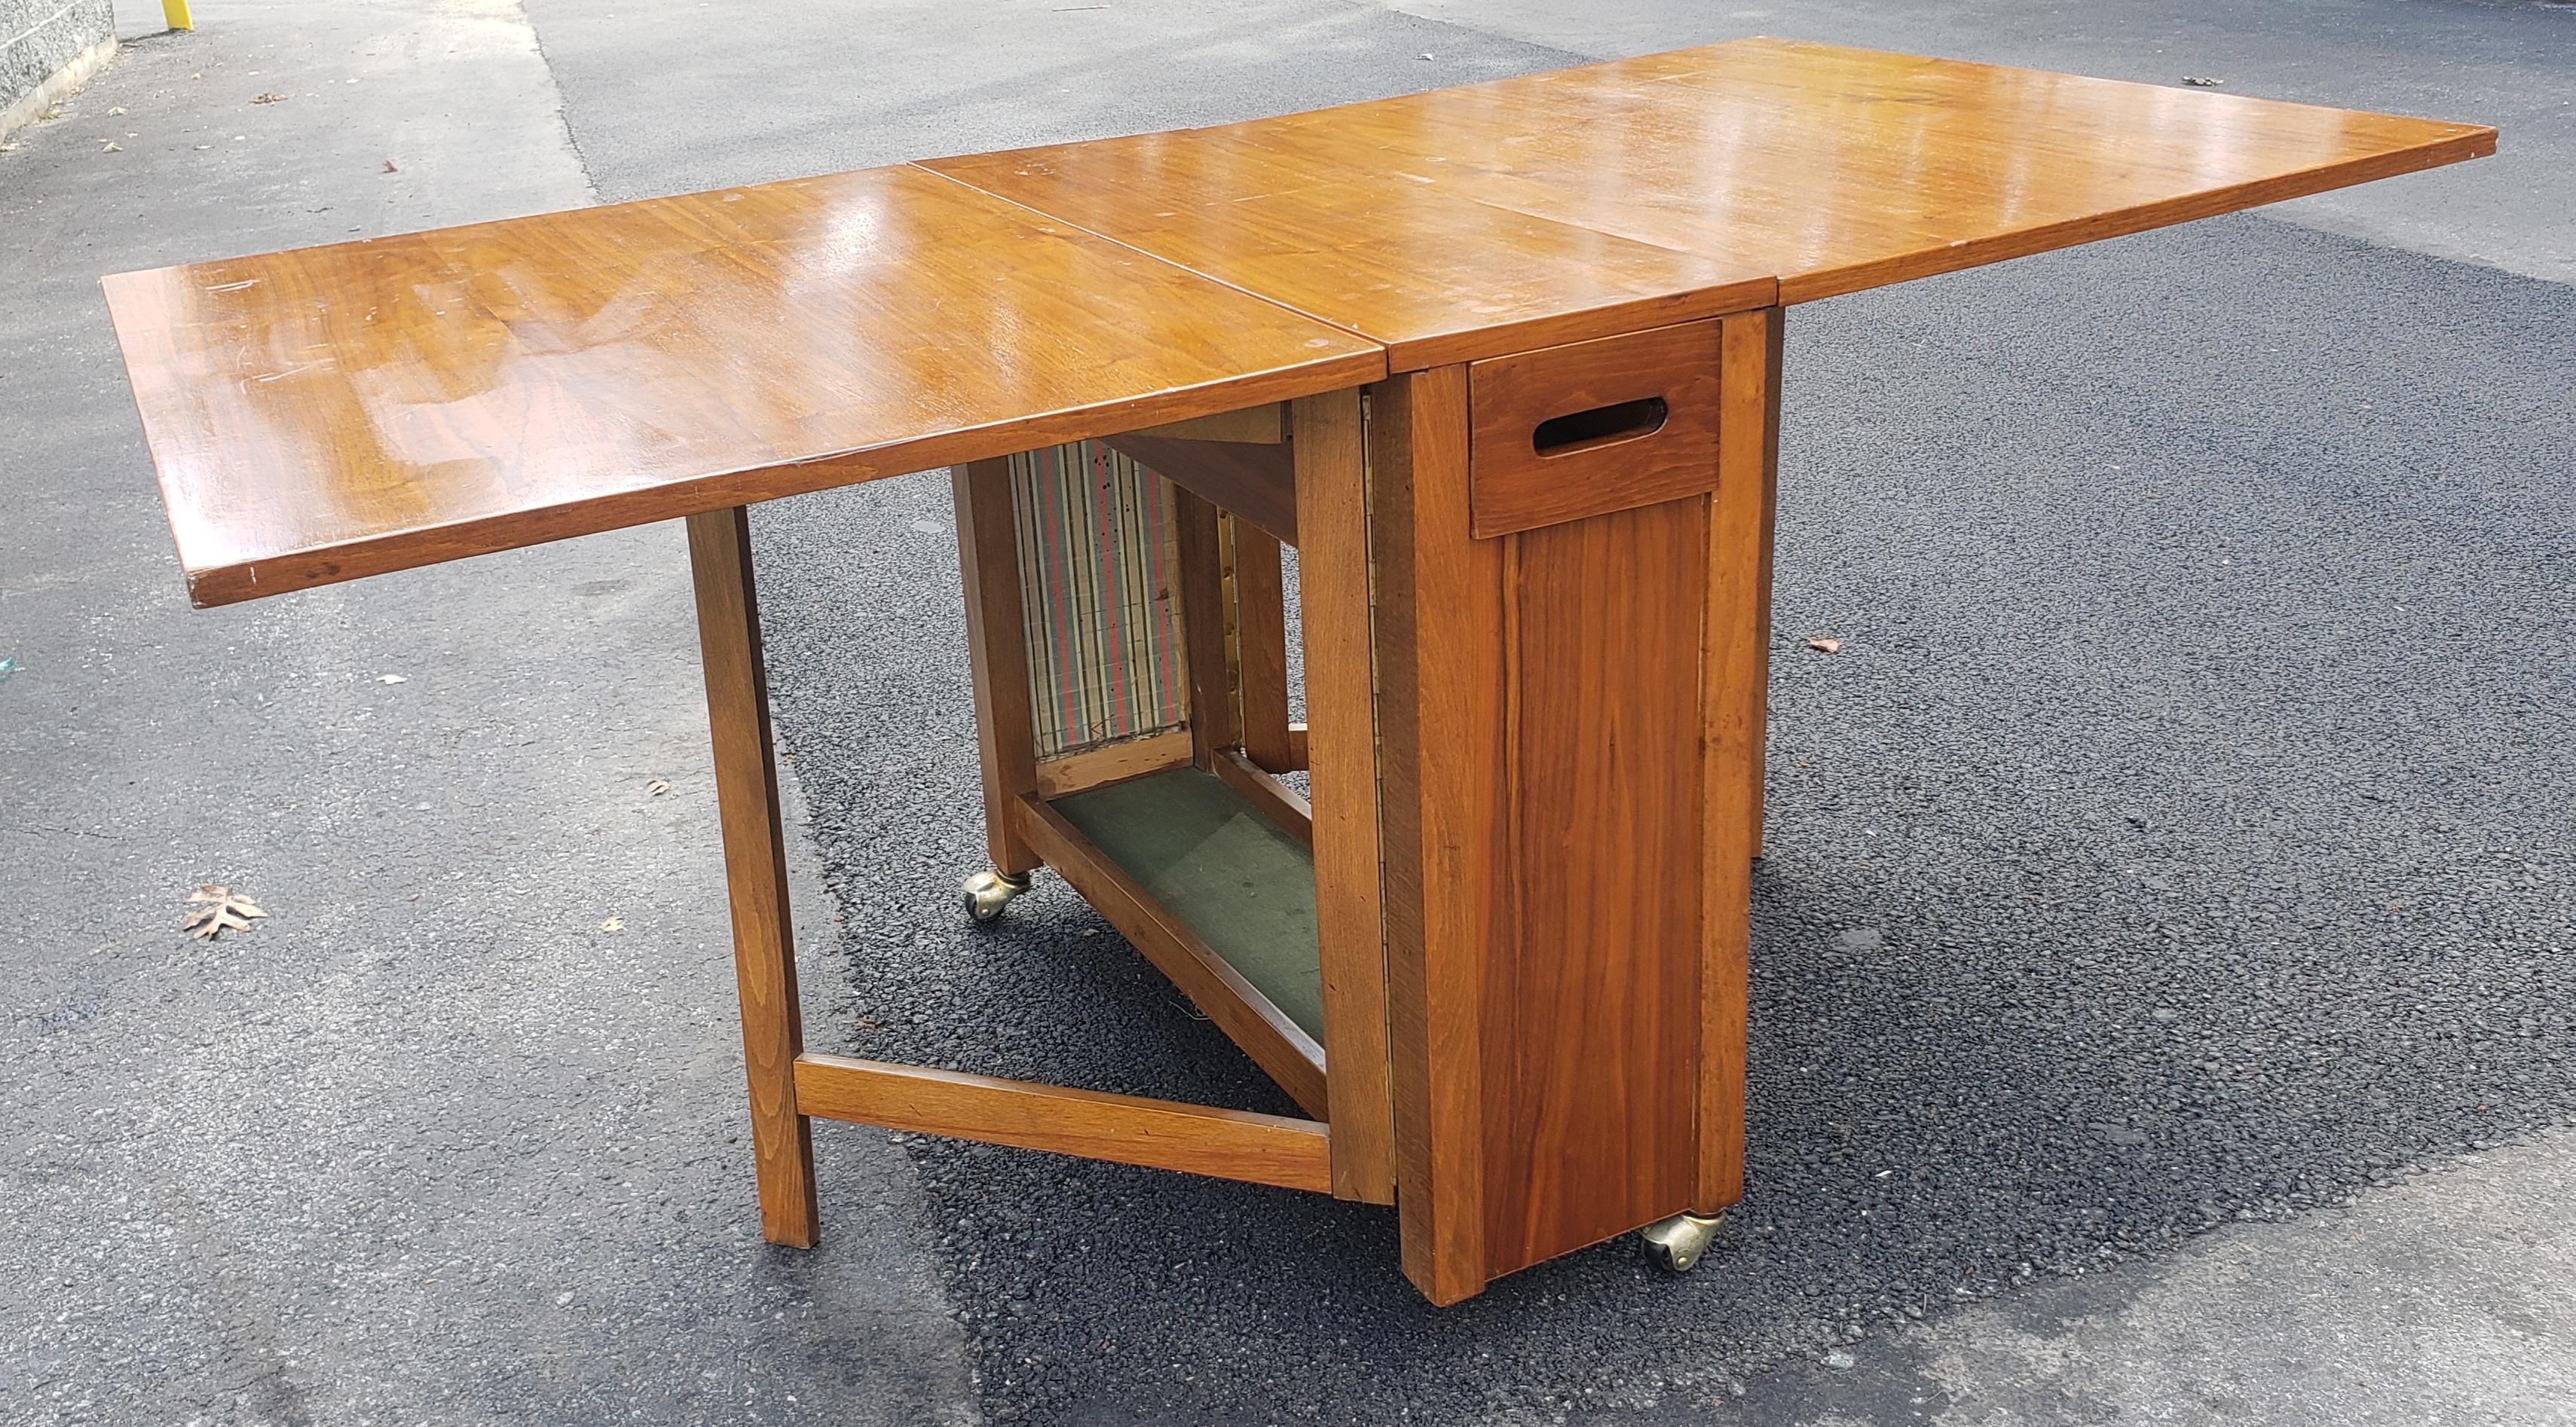 Mid-Century Danish Modern Teak Drop-Leaf Dining Table with Storage on Rollers In Good Condition For Sale In Germantown, MD